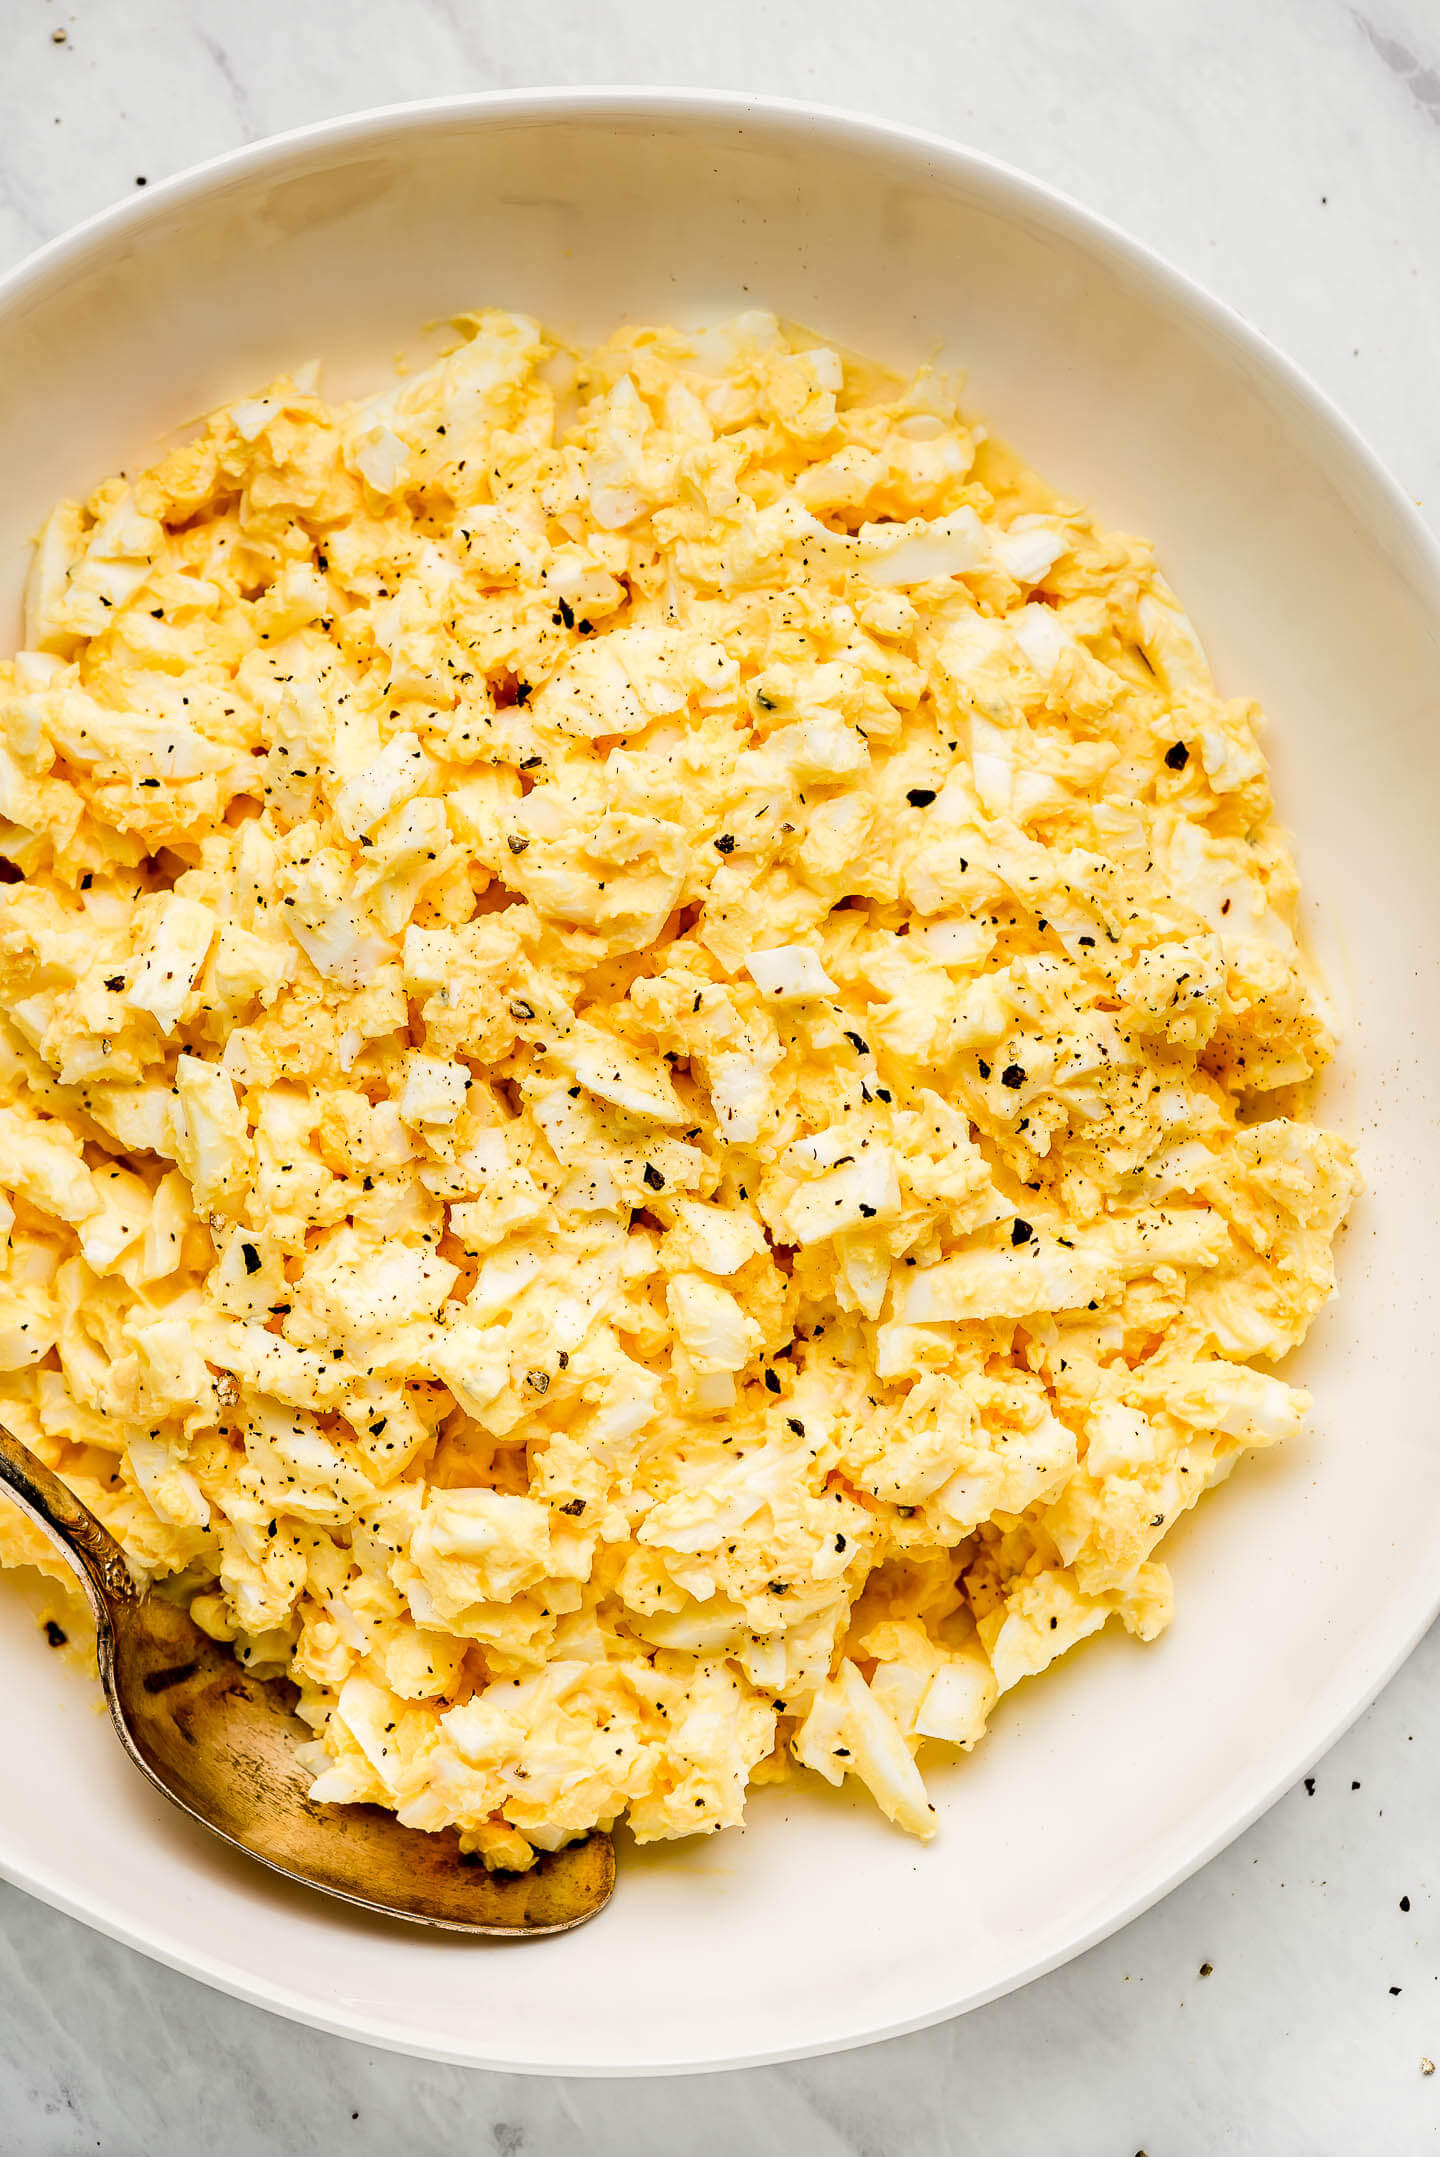 Egg Salad in a bowl sprinkled with pepper.